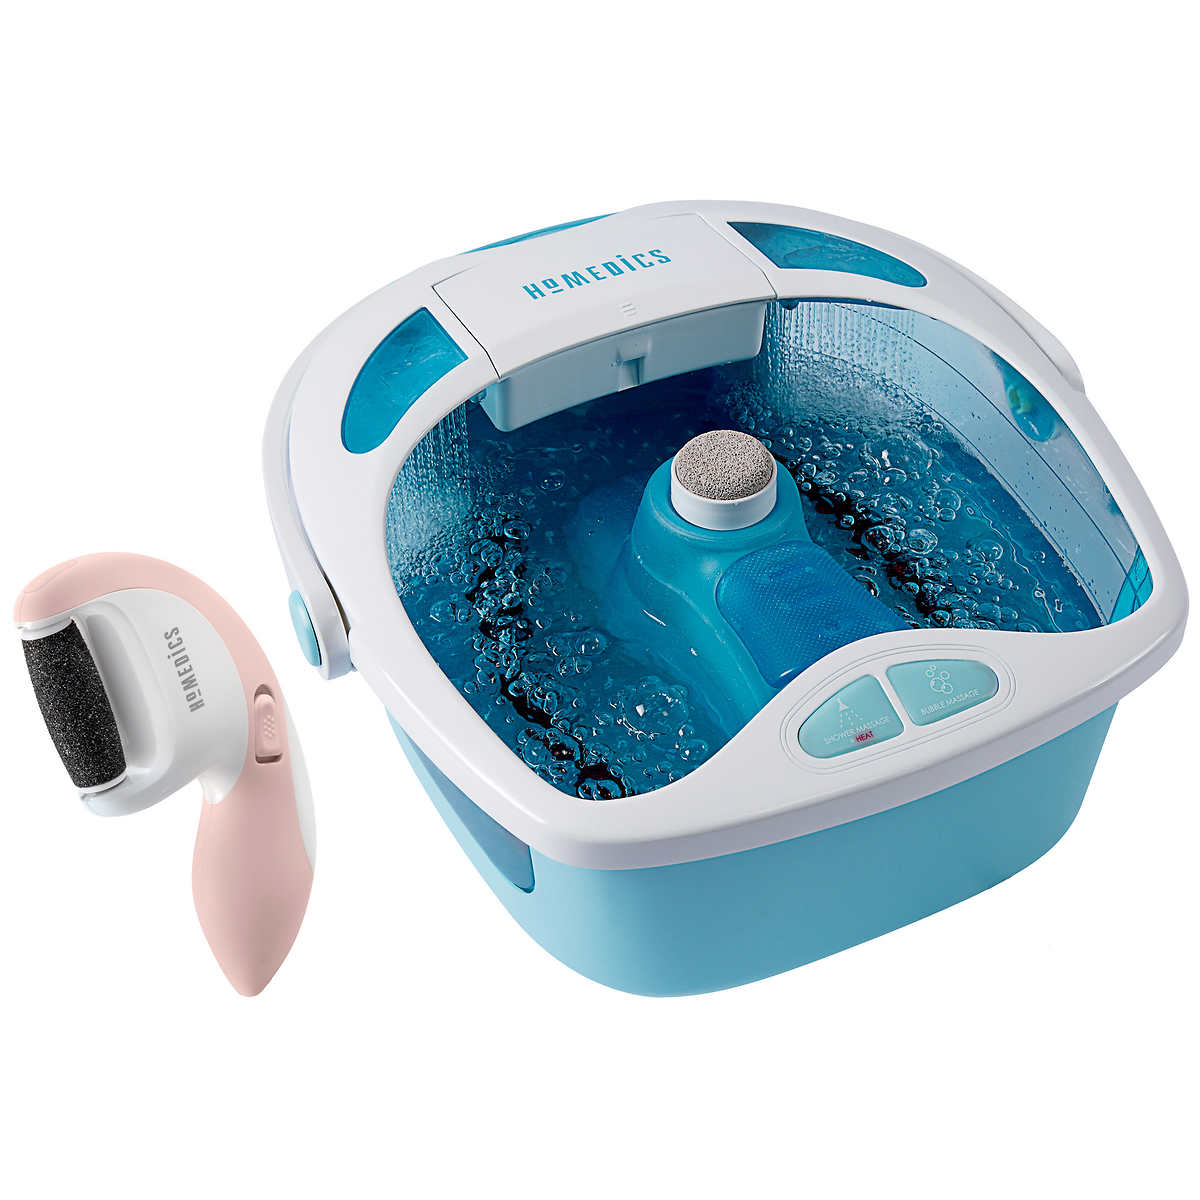 Bubble Bliss Deluxe Foot Spa, Provides the comfort and massage 